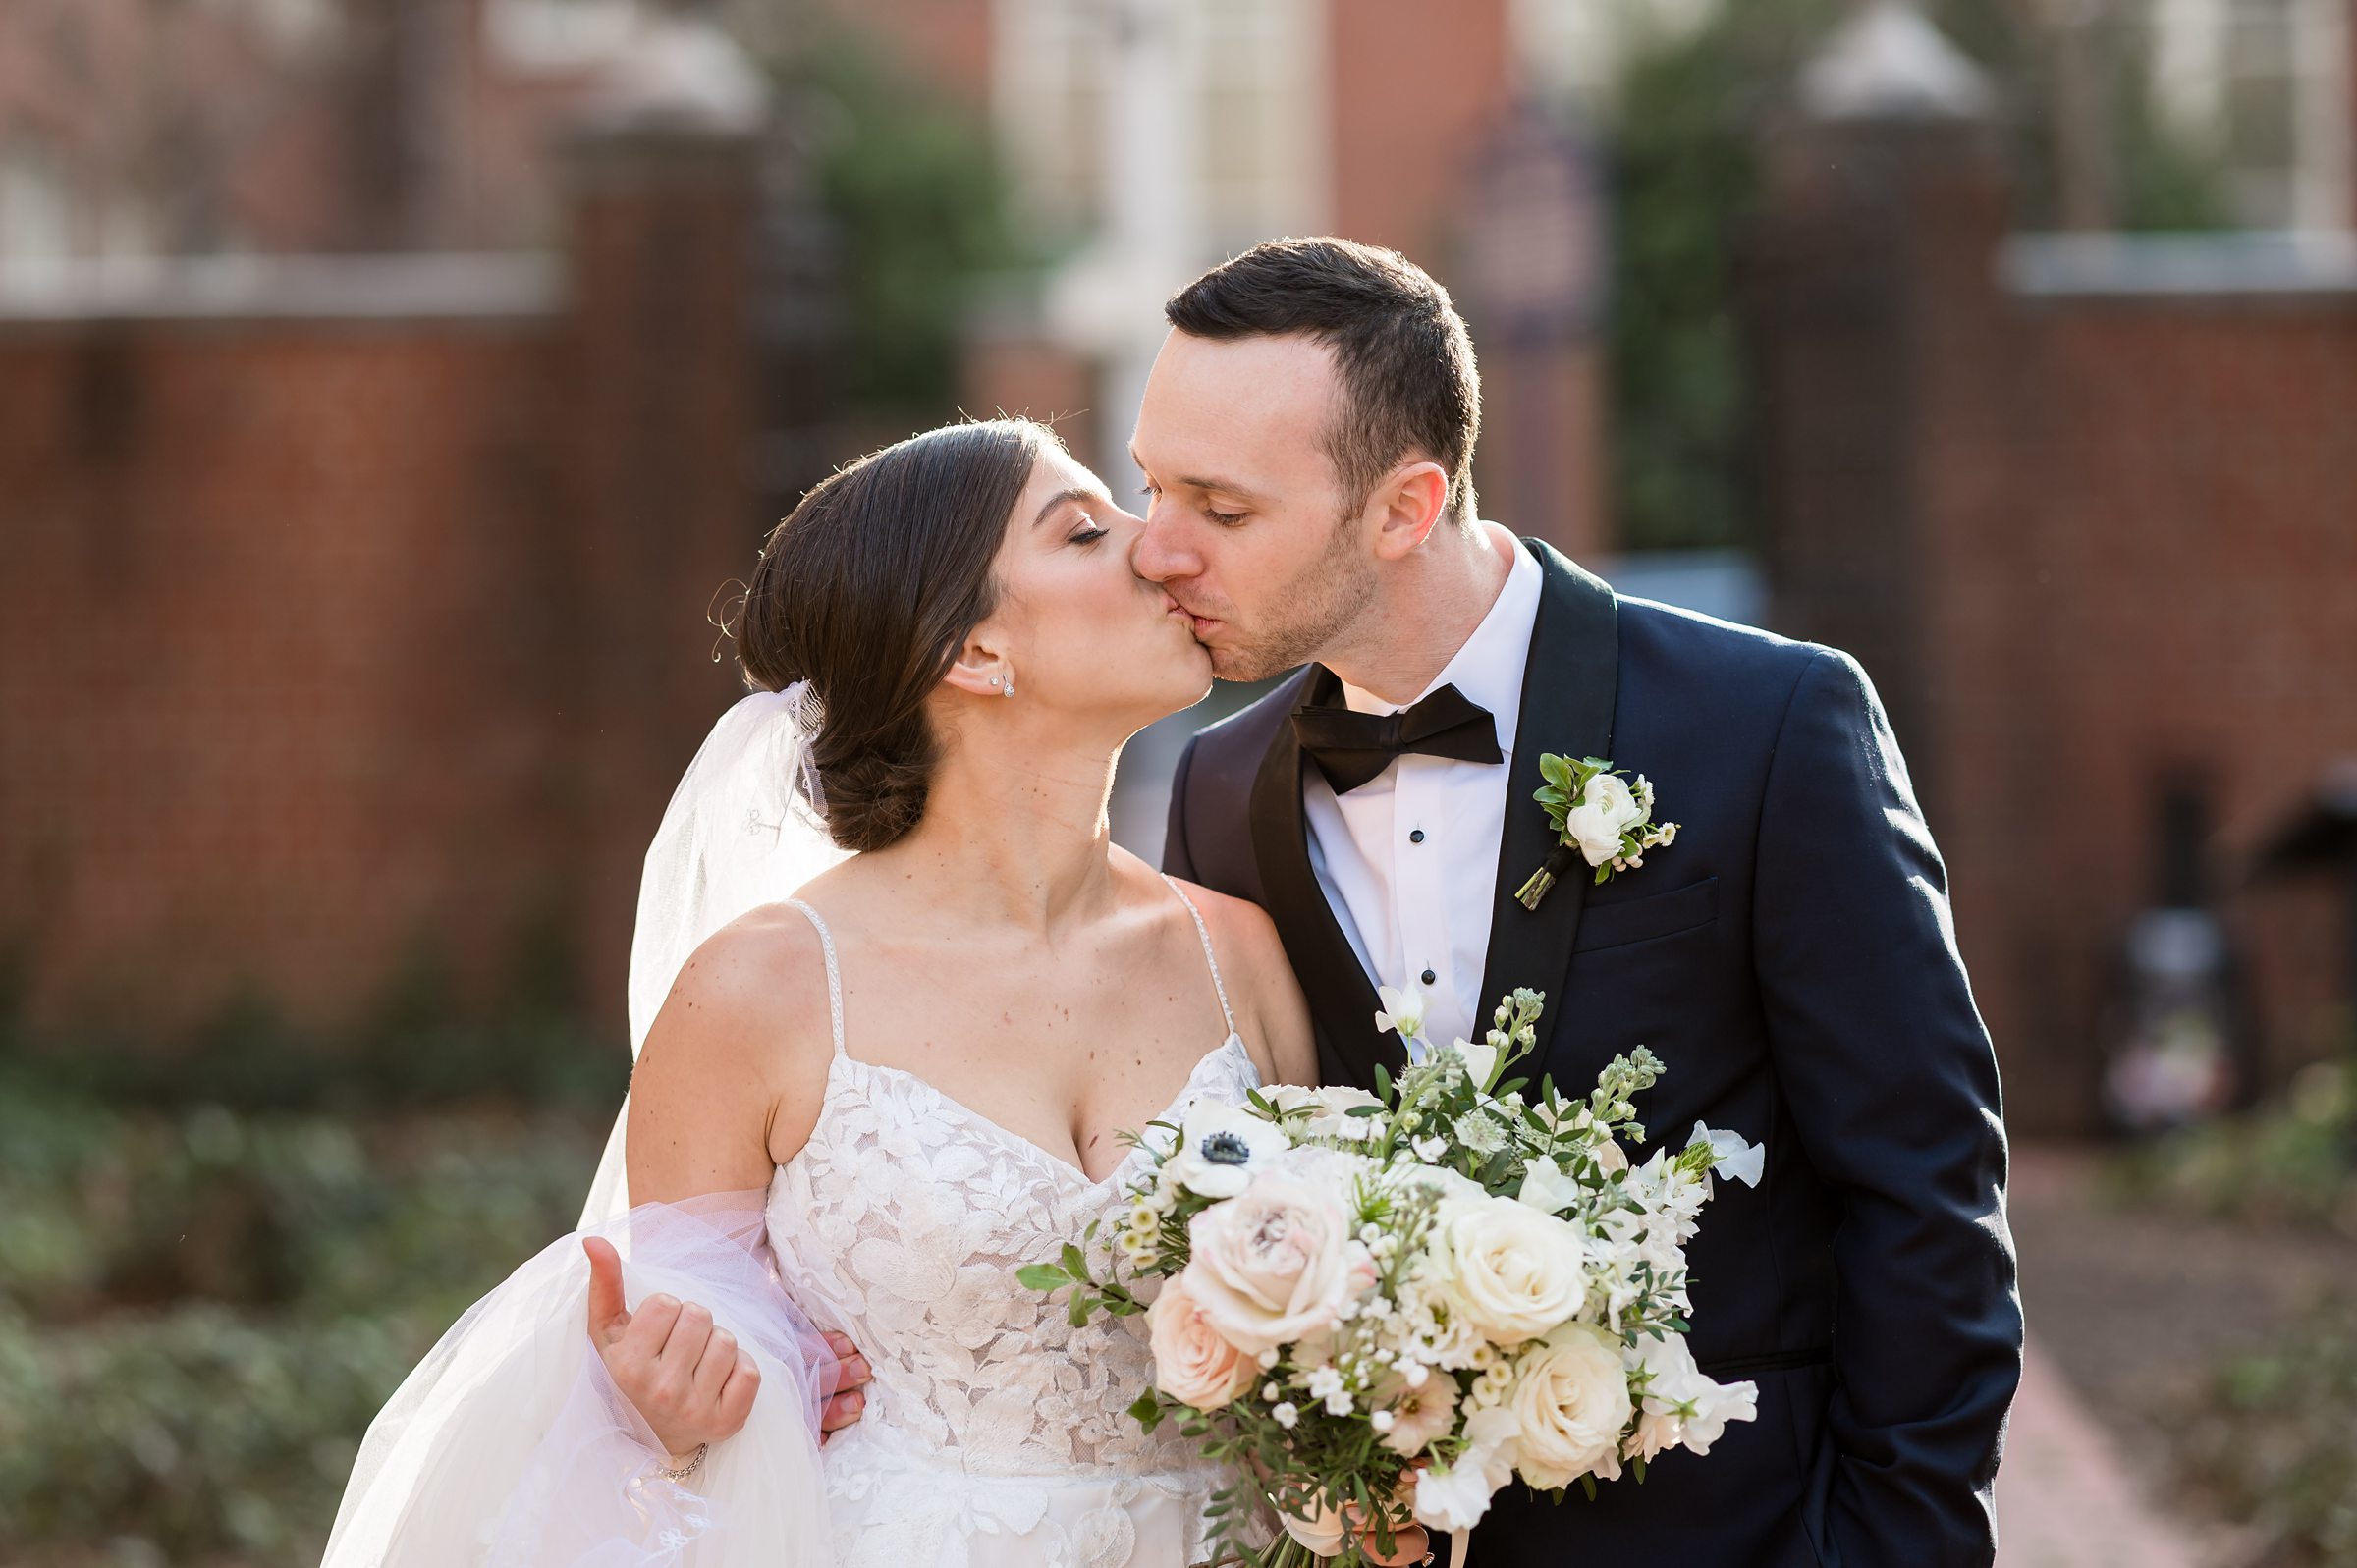 At a Lilah Events wedding, the bride and groom share a kiss in front of a brick building.